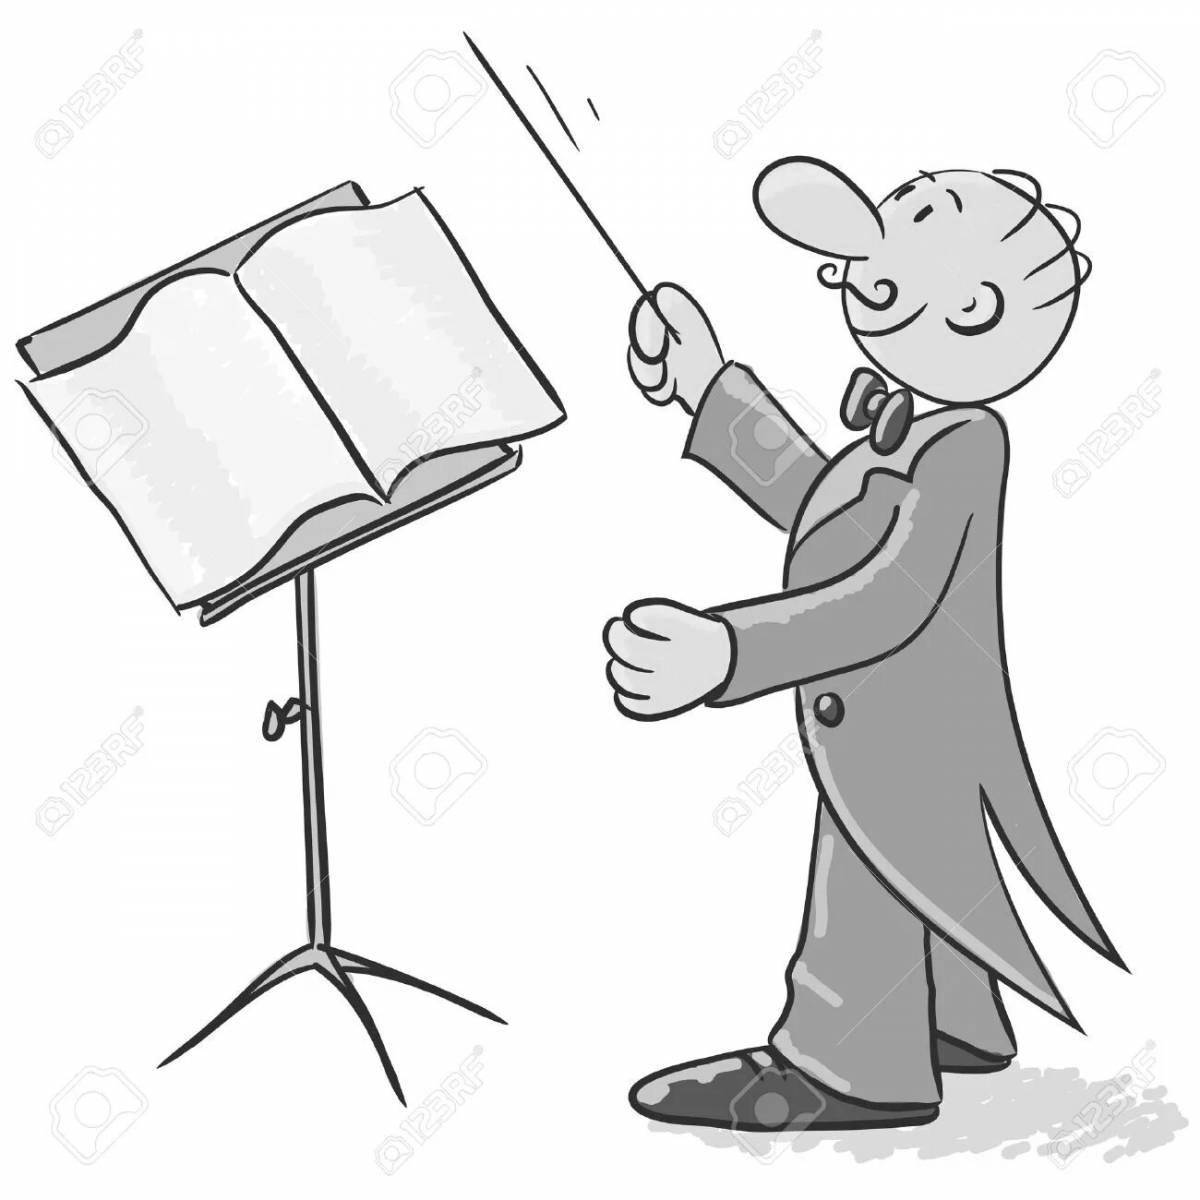 Charming conductor coloring page